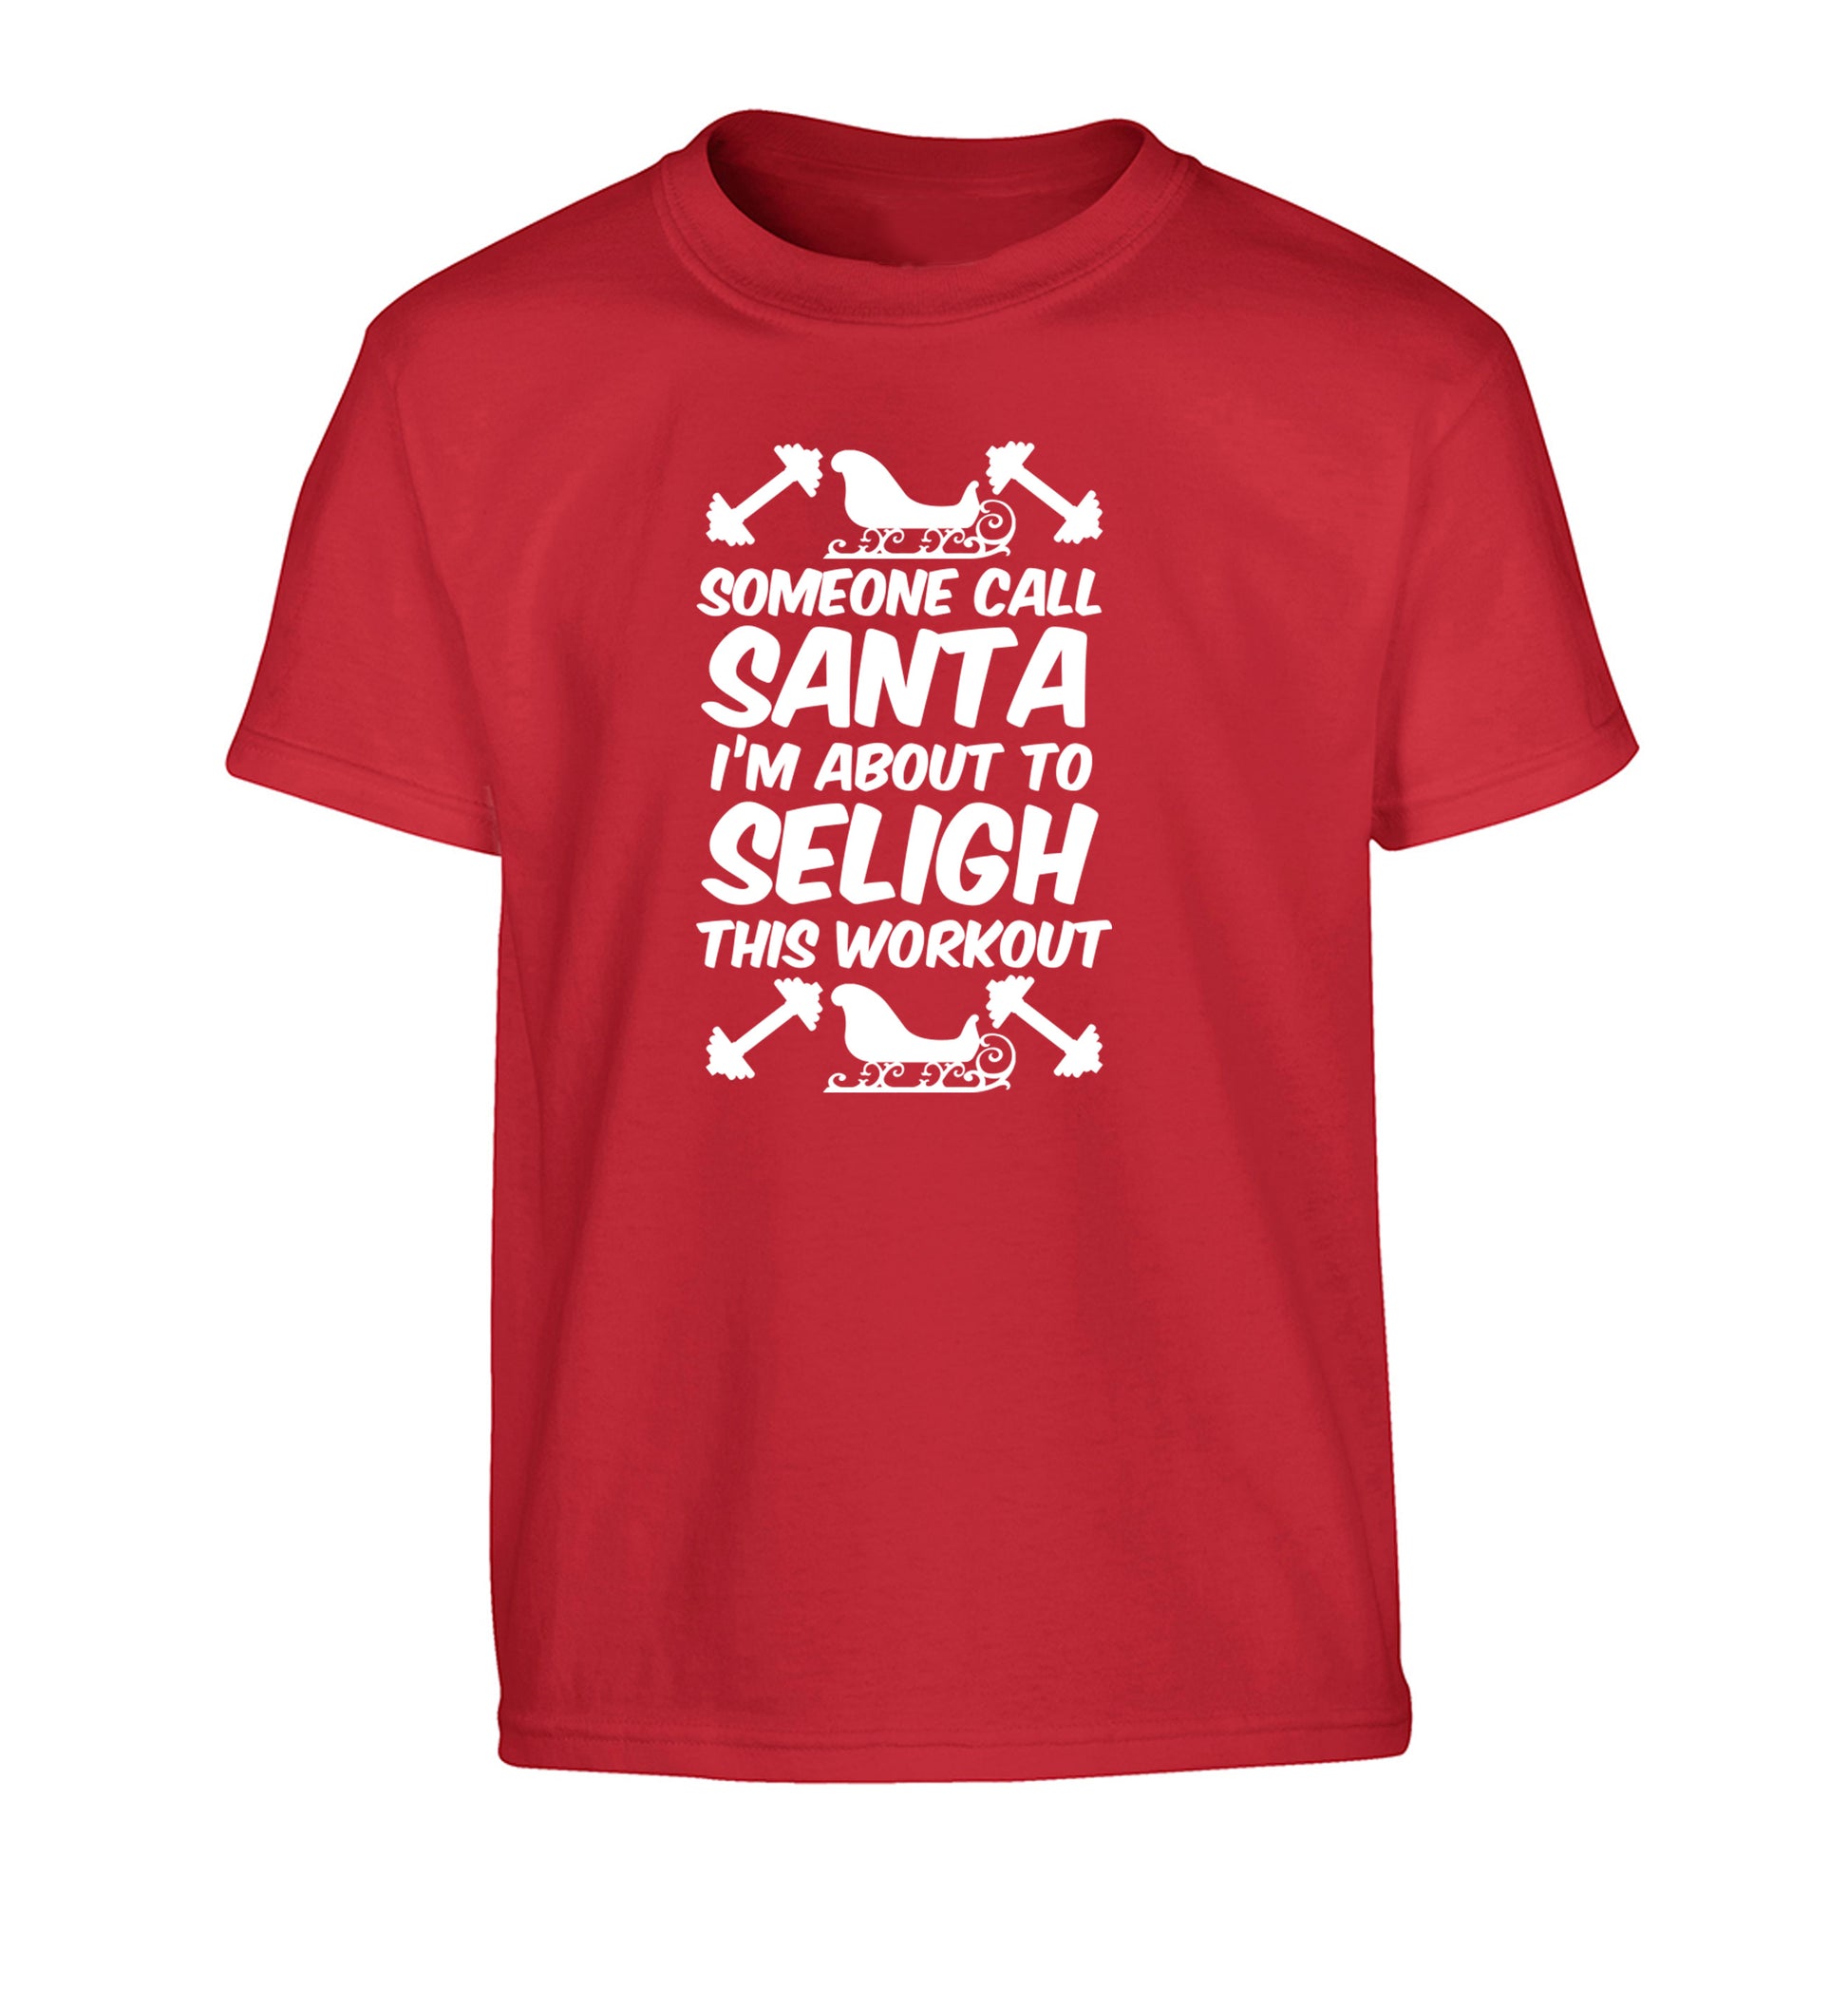 Someone call santa, I'm about to sleigh this workout Children's red Tshirt 12-14 Years